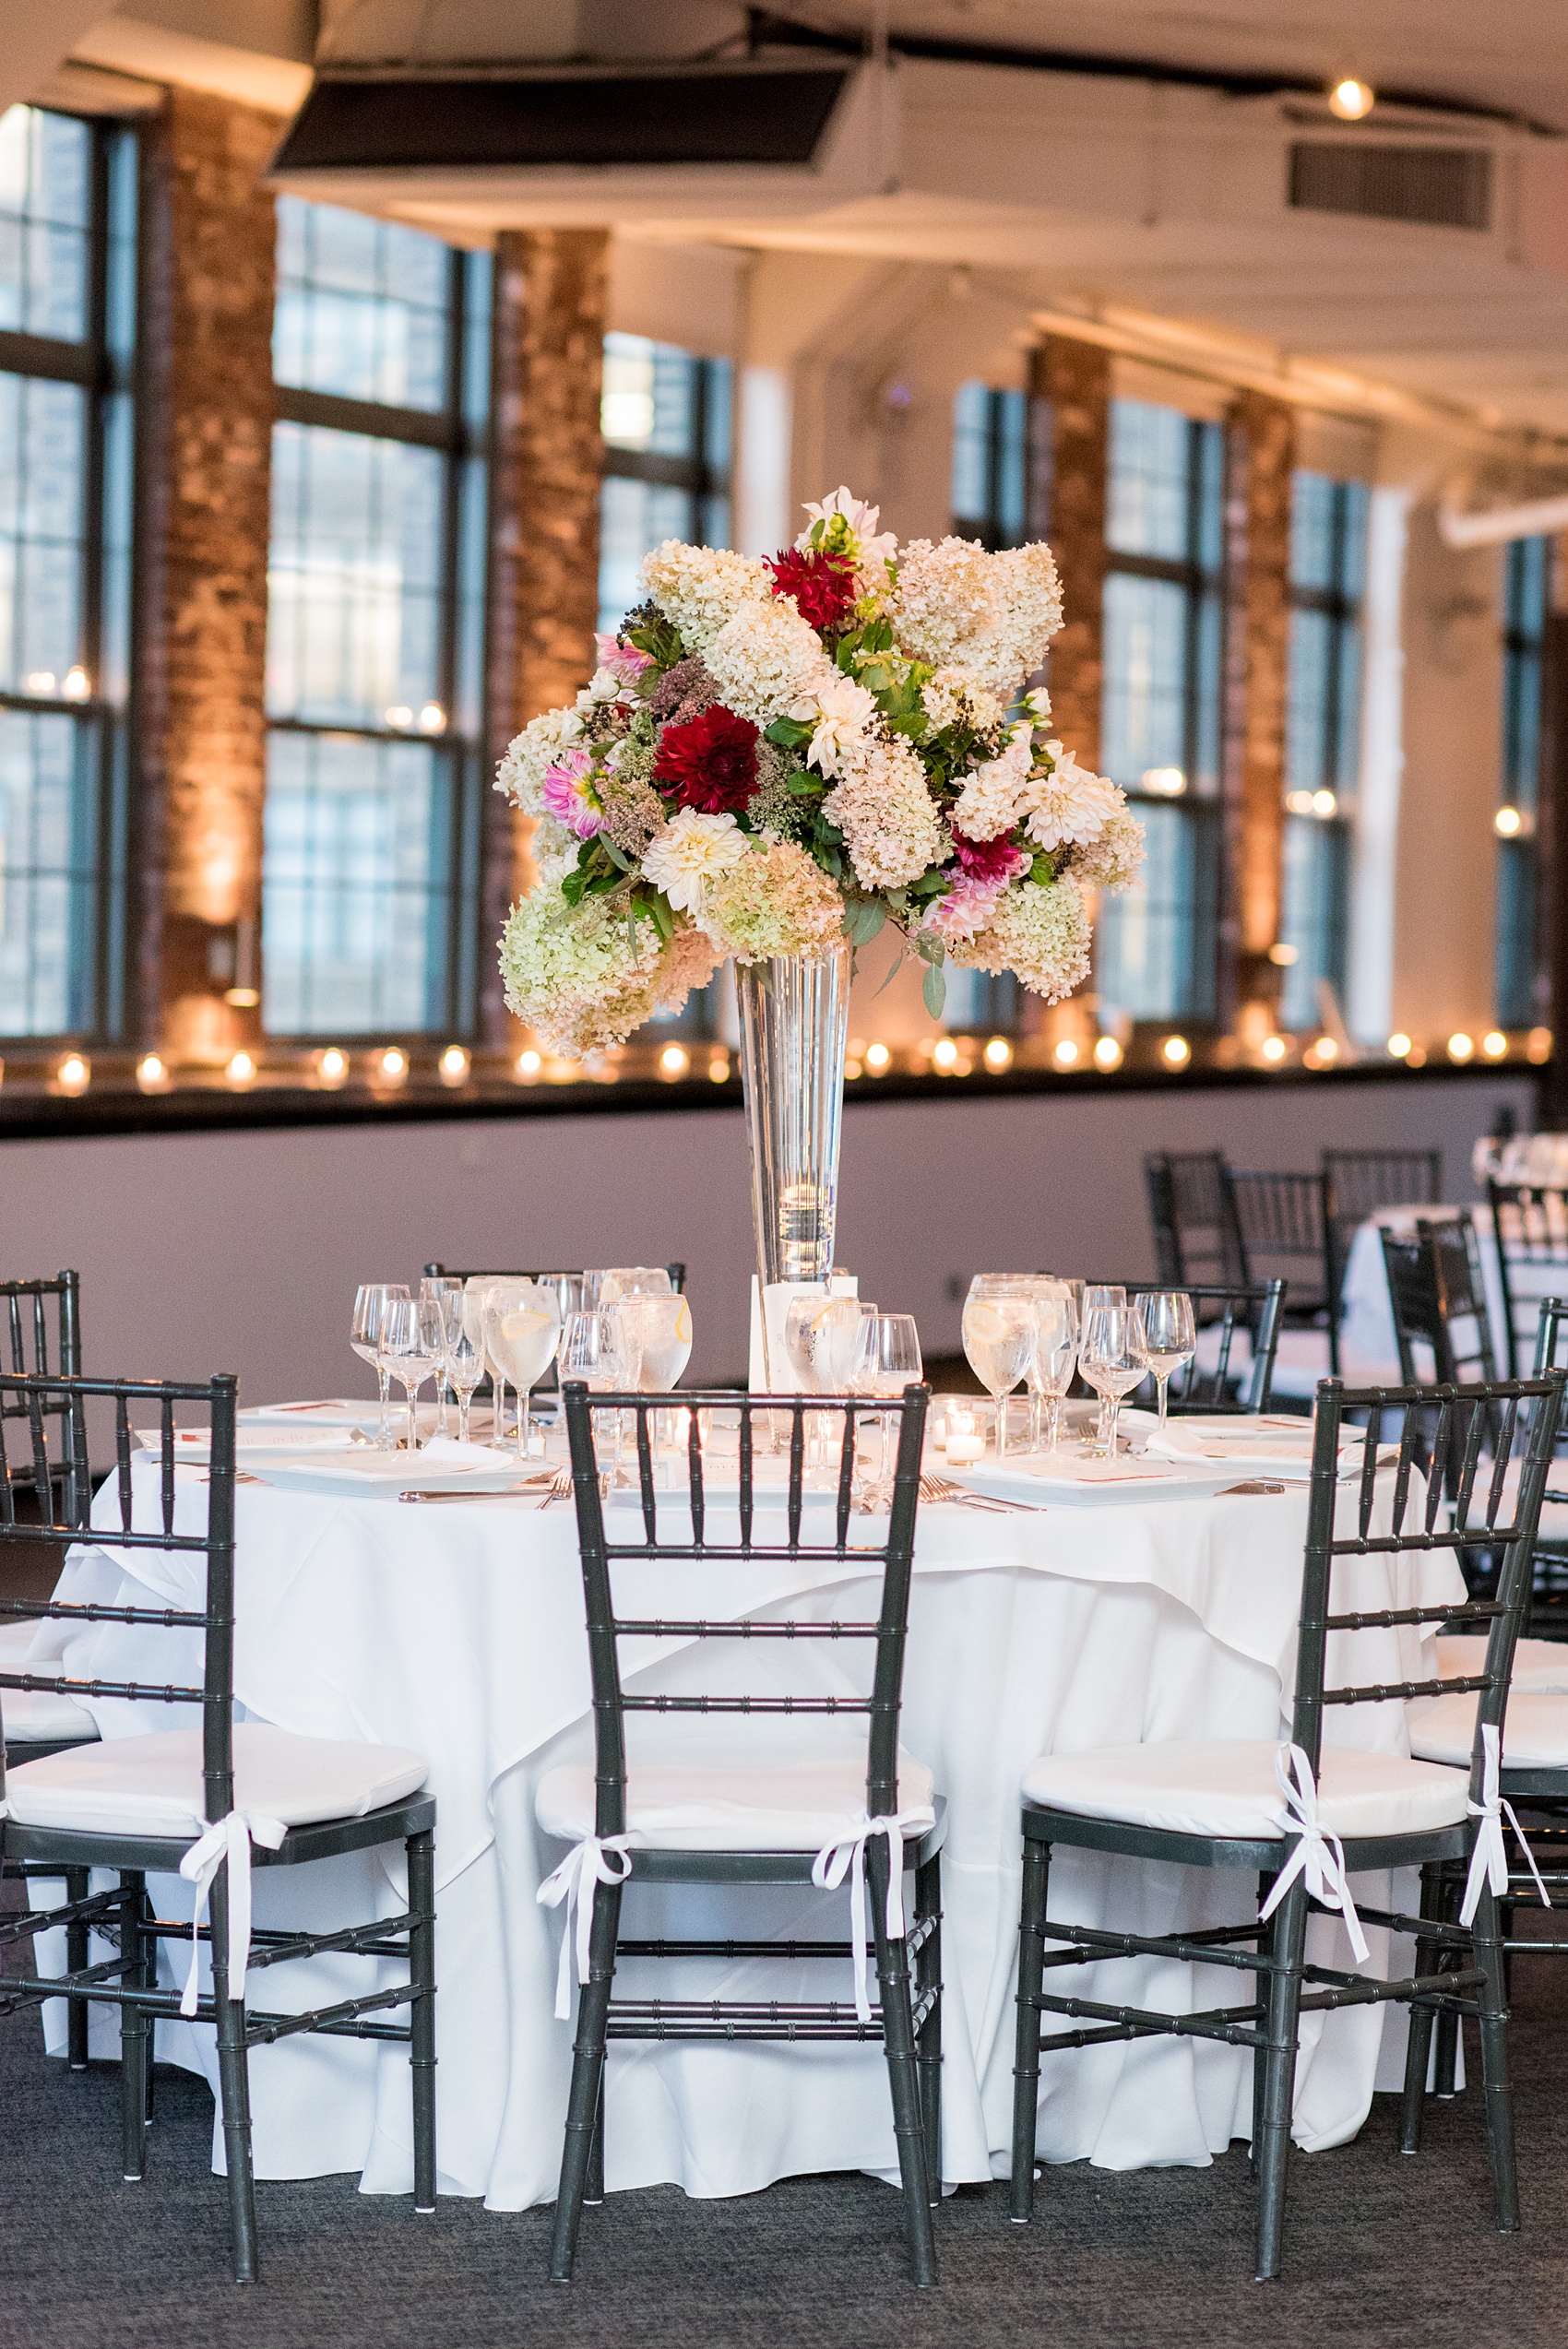 Photos of a NYC wedding venue, Tribeca Rooftop, by Mikkel Paige Photography. This ceremony and reception location has an outdoor space overlooking the Manhattan skyline. These pictures will provide inspiration in New York! The couple dreamed of getting married in this awesome city with flowers and colors of fall. Click through for more details from this beautiful celebration! #TribecaRooftop #NYCVenues #MikkelPaige #NYCwedding #fallflowers 